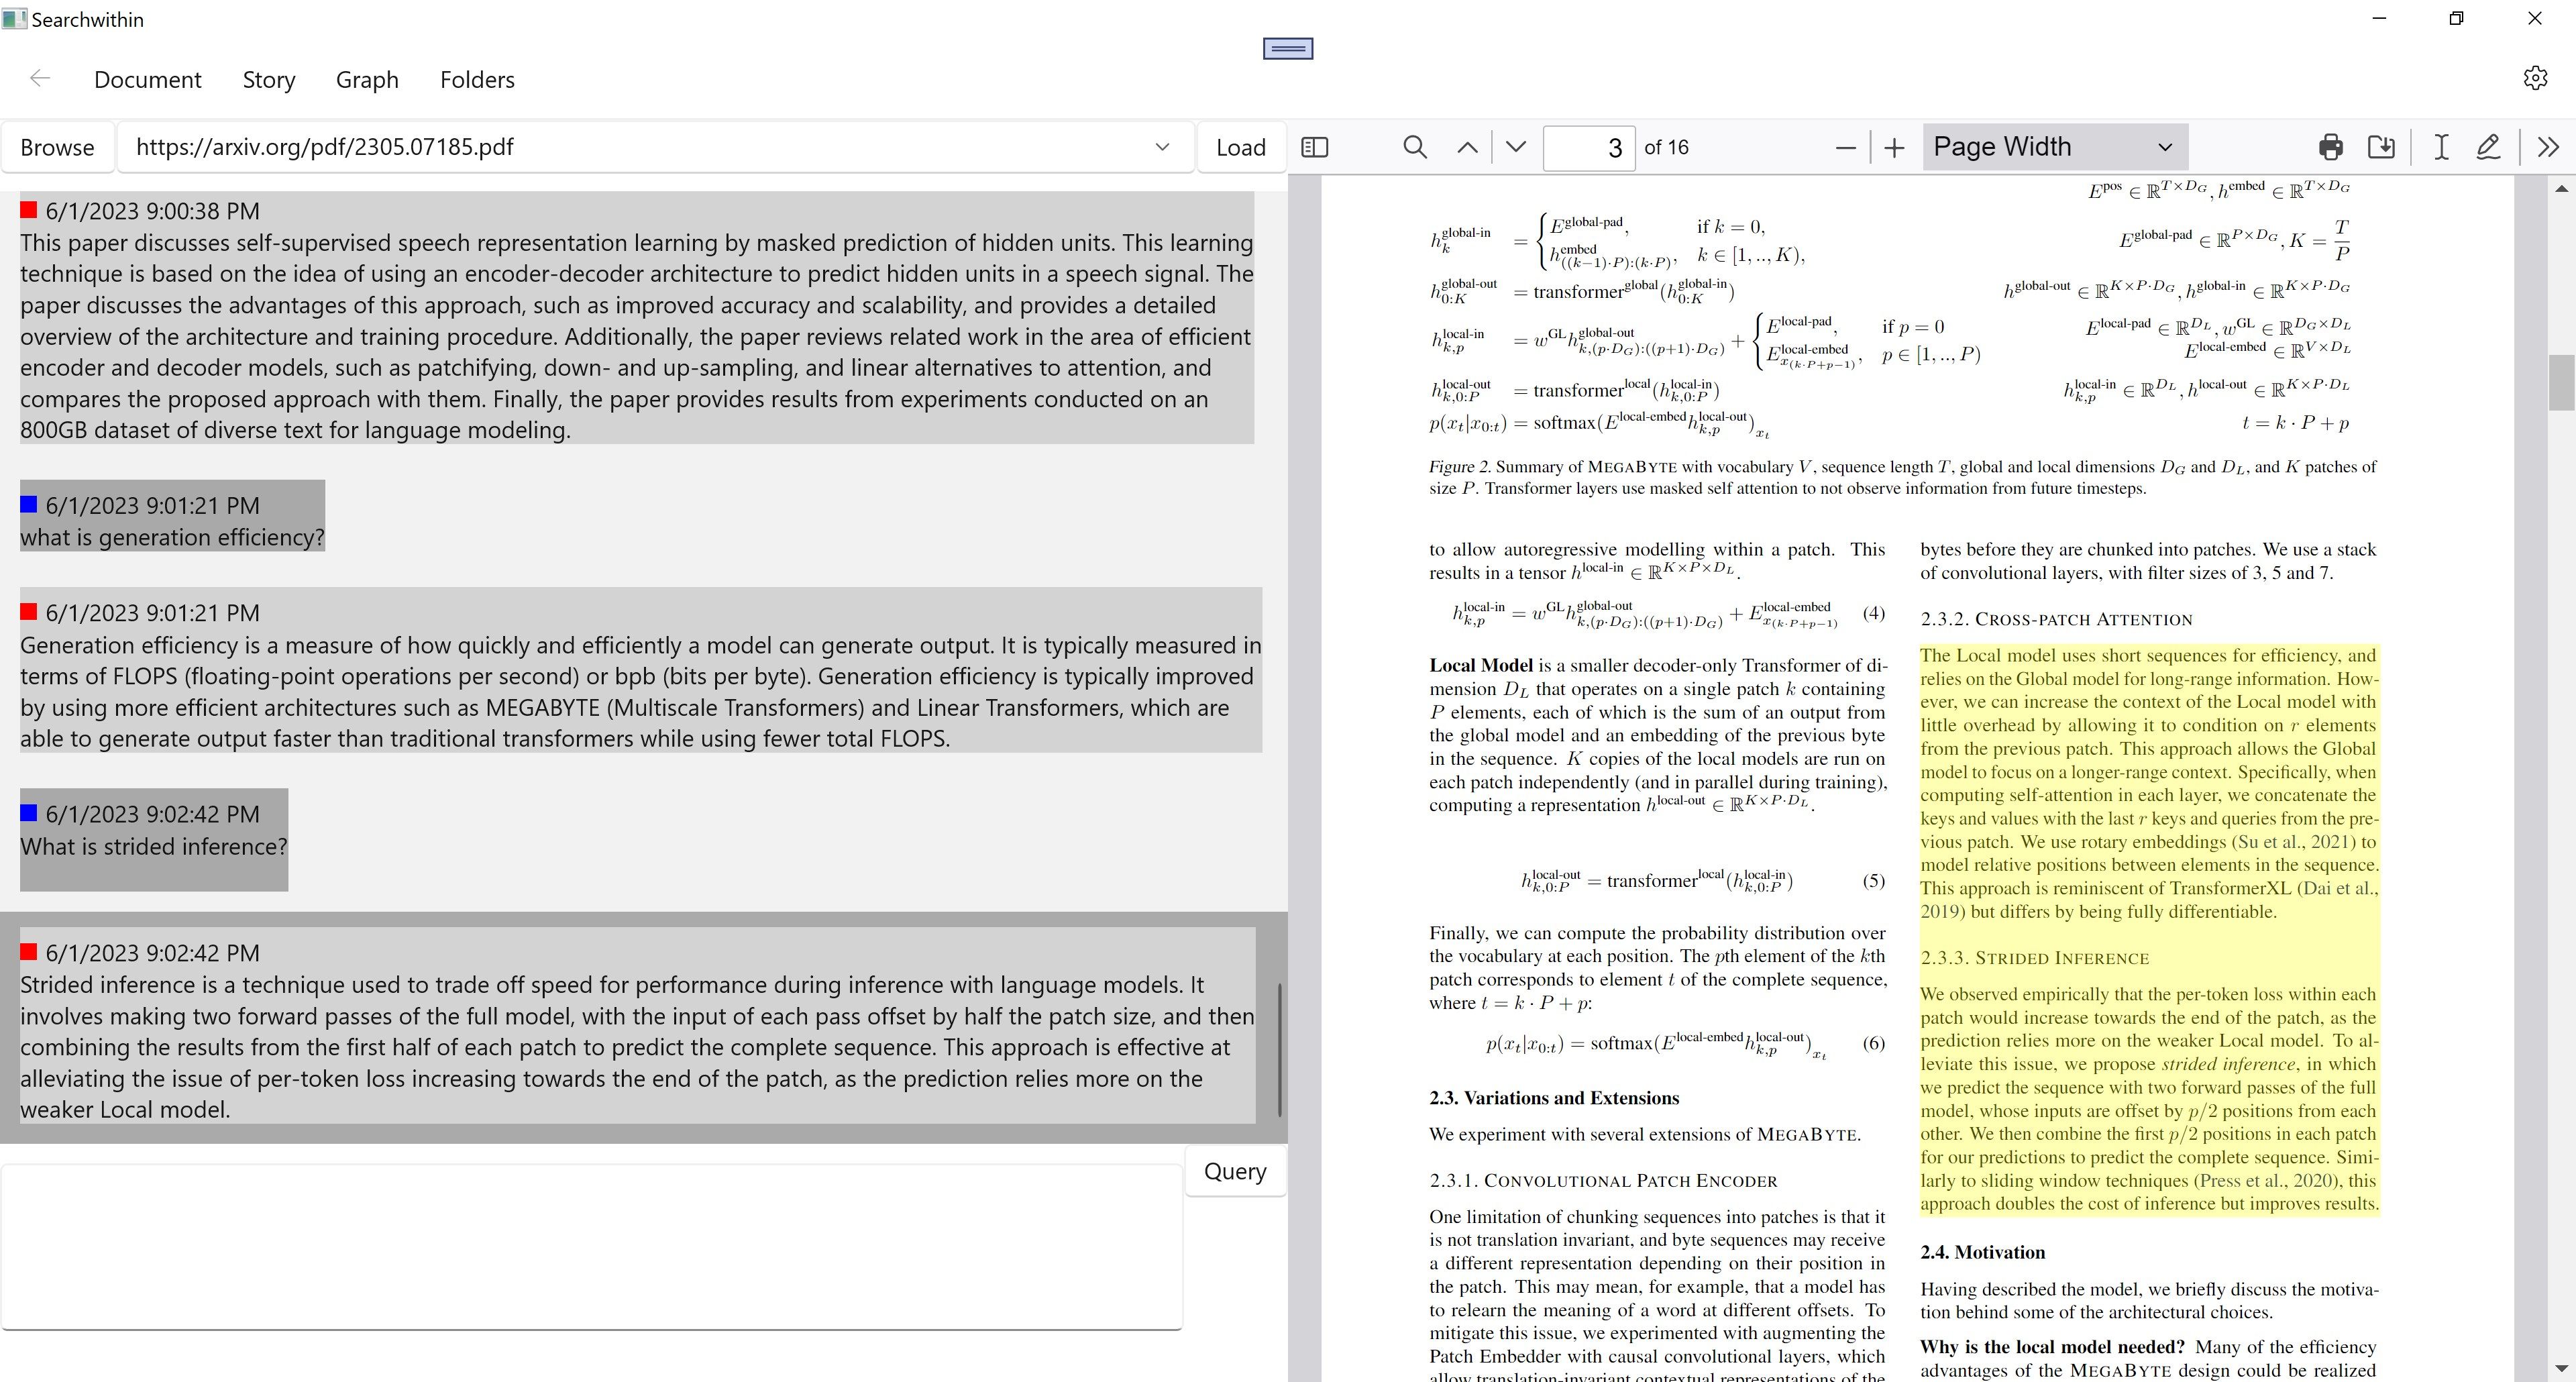 Relevant sections in PDF files are highlighted in yellow.